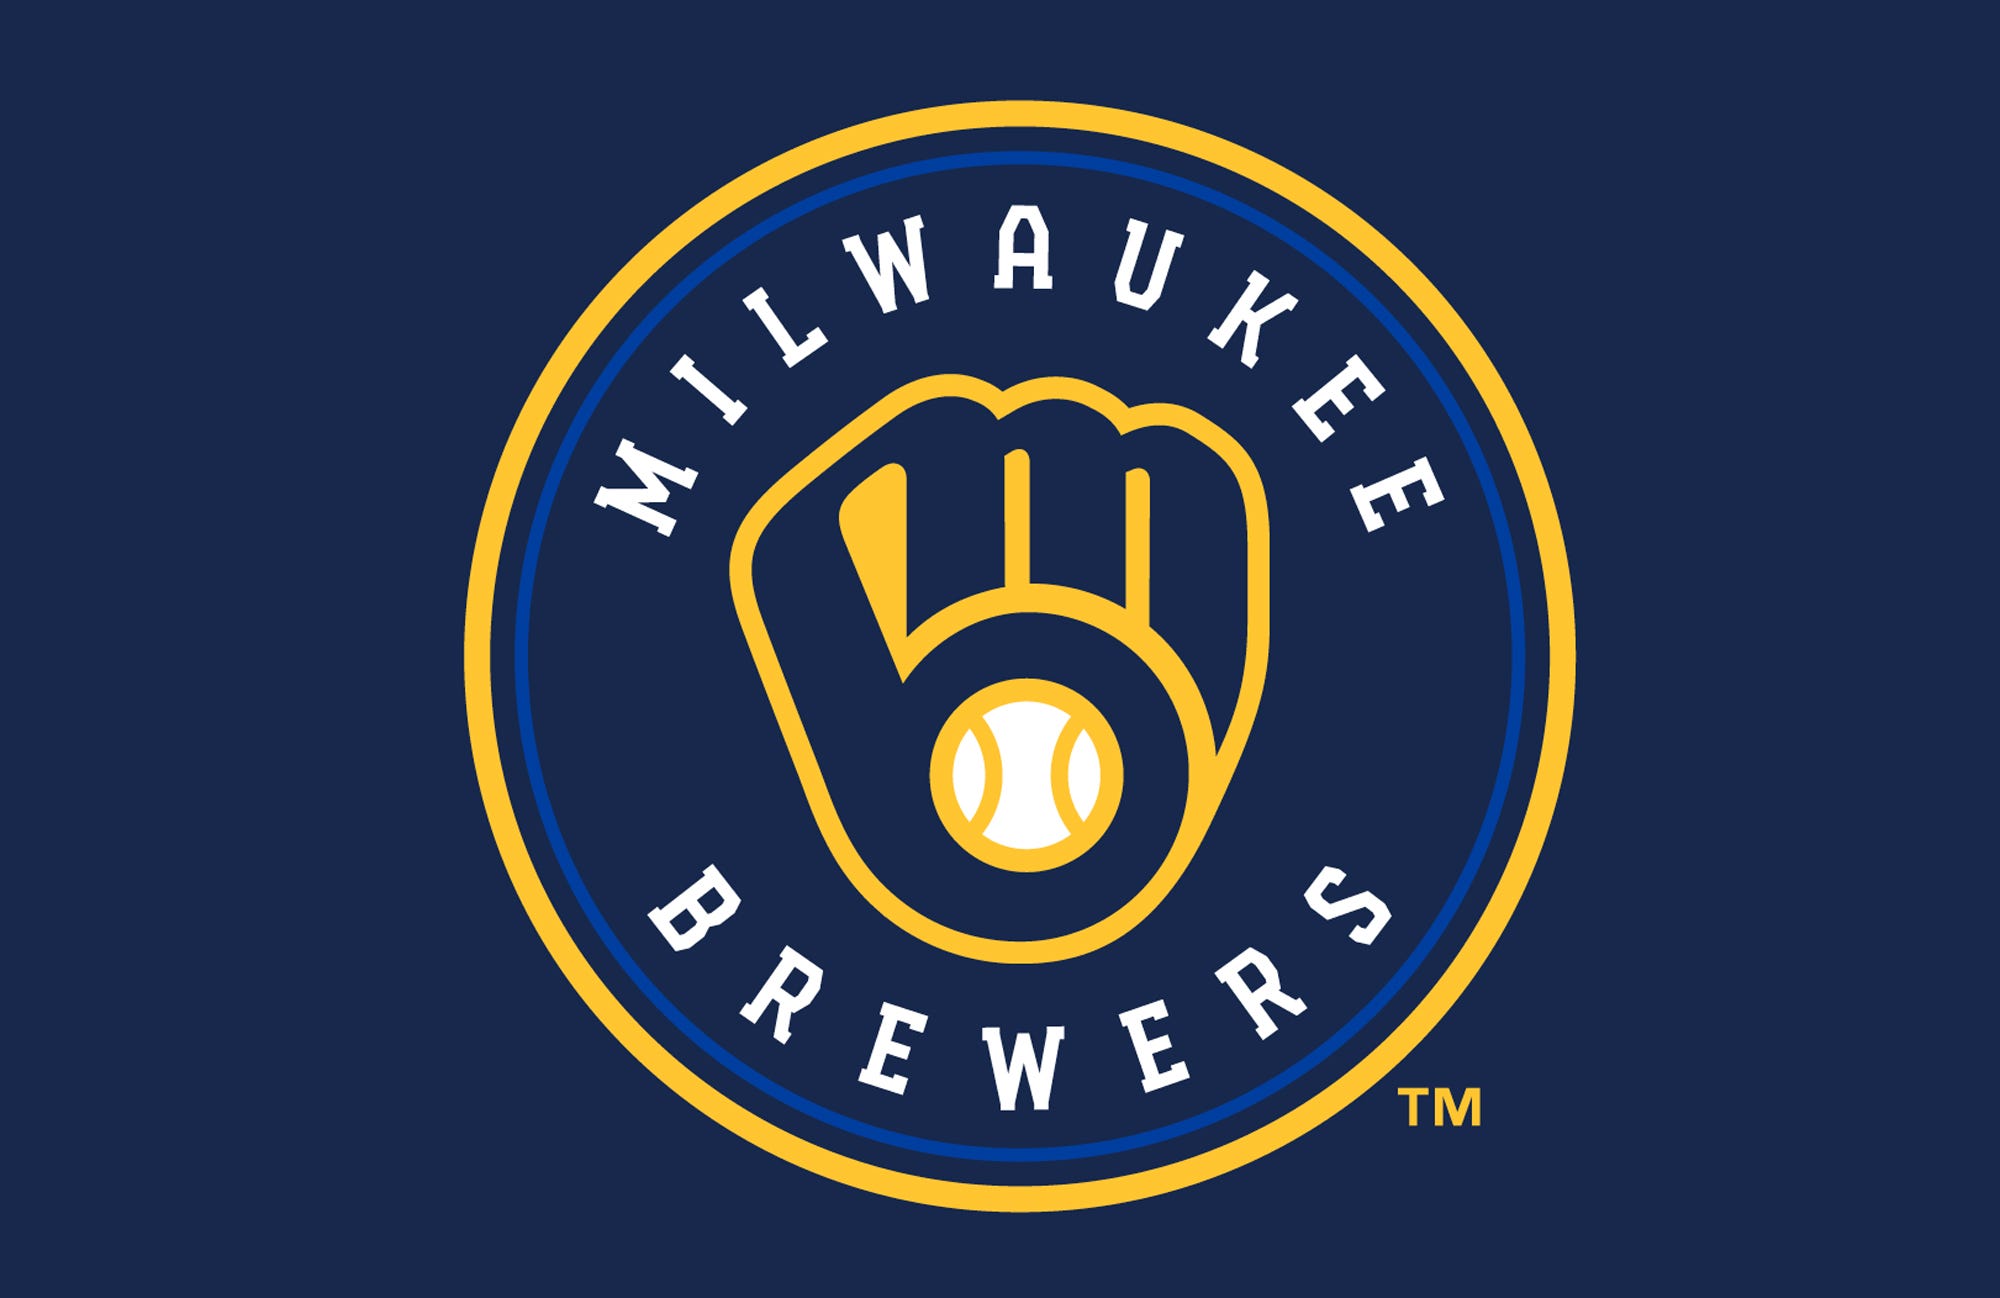 Brewers logo: How the new design came to be